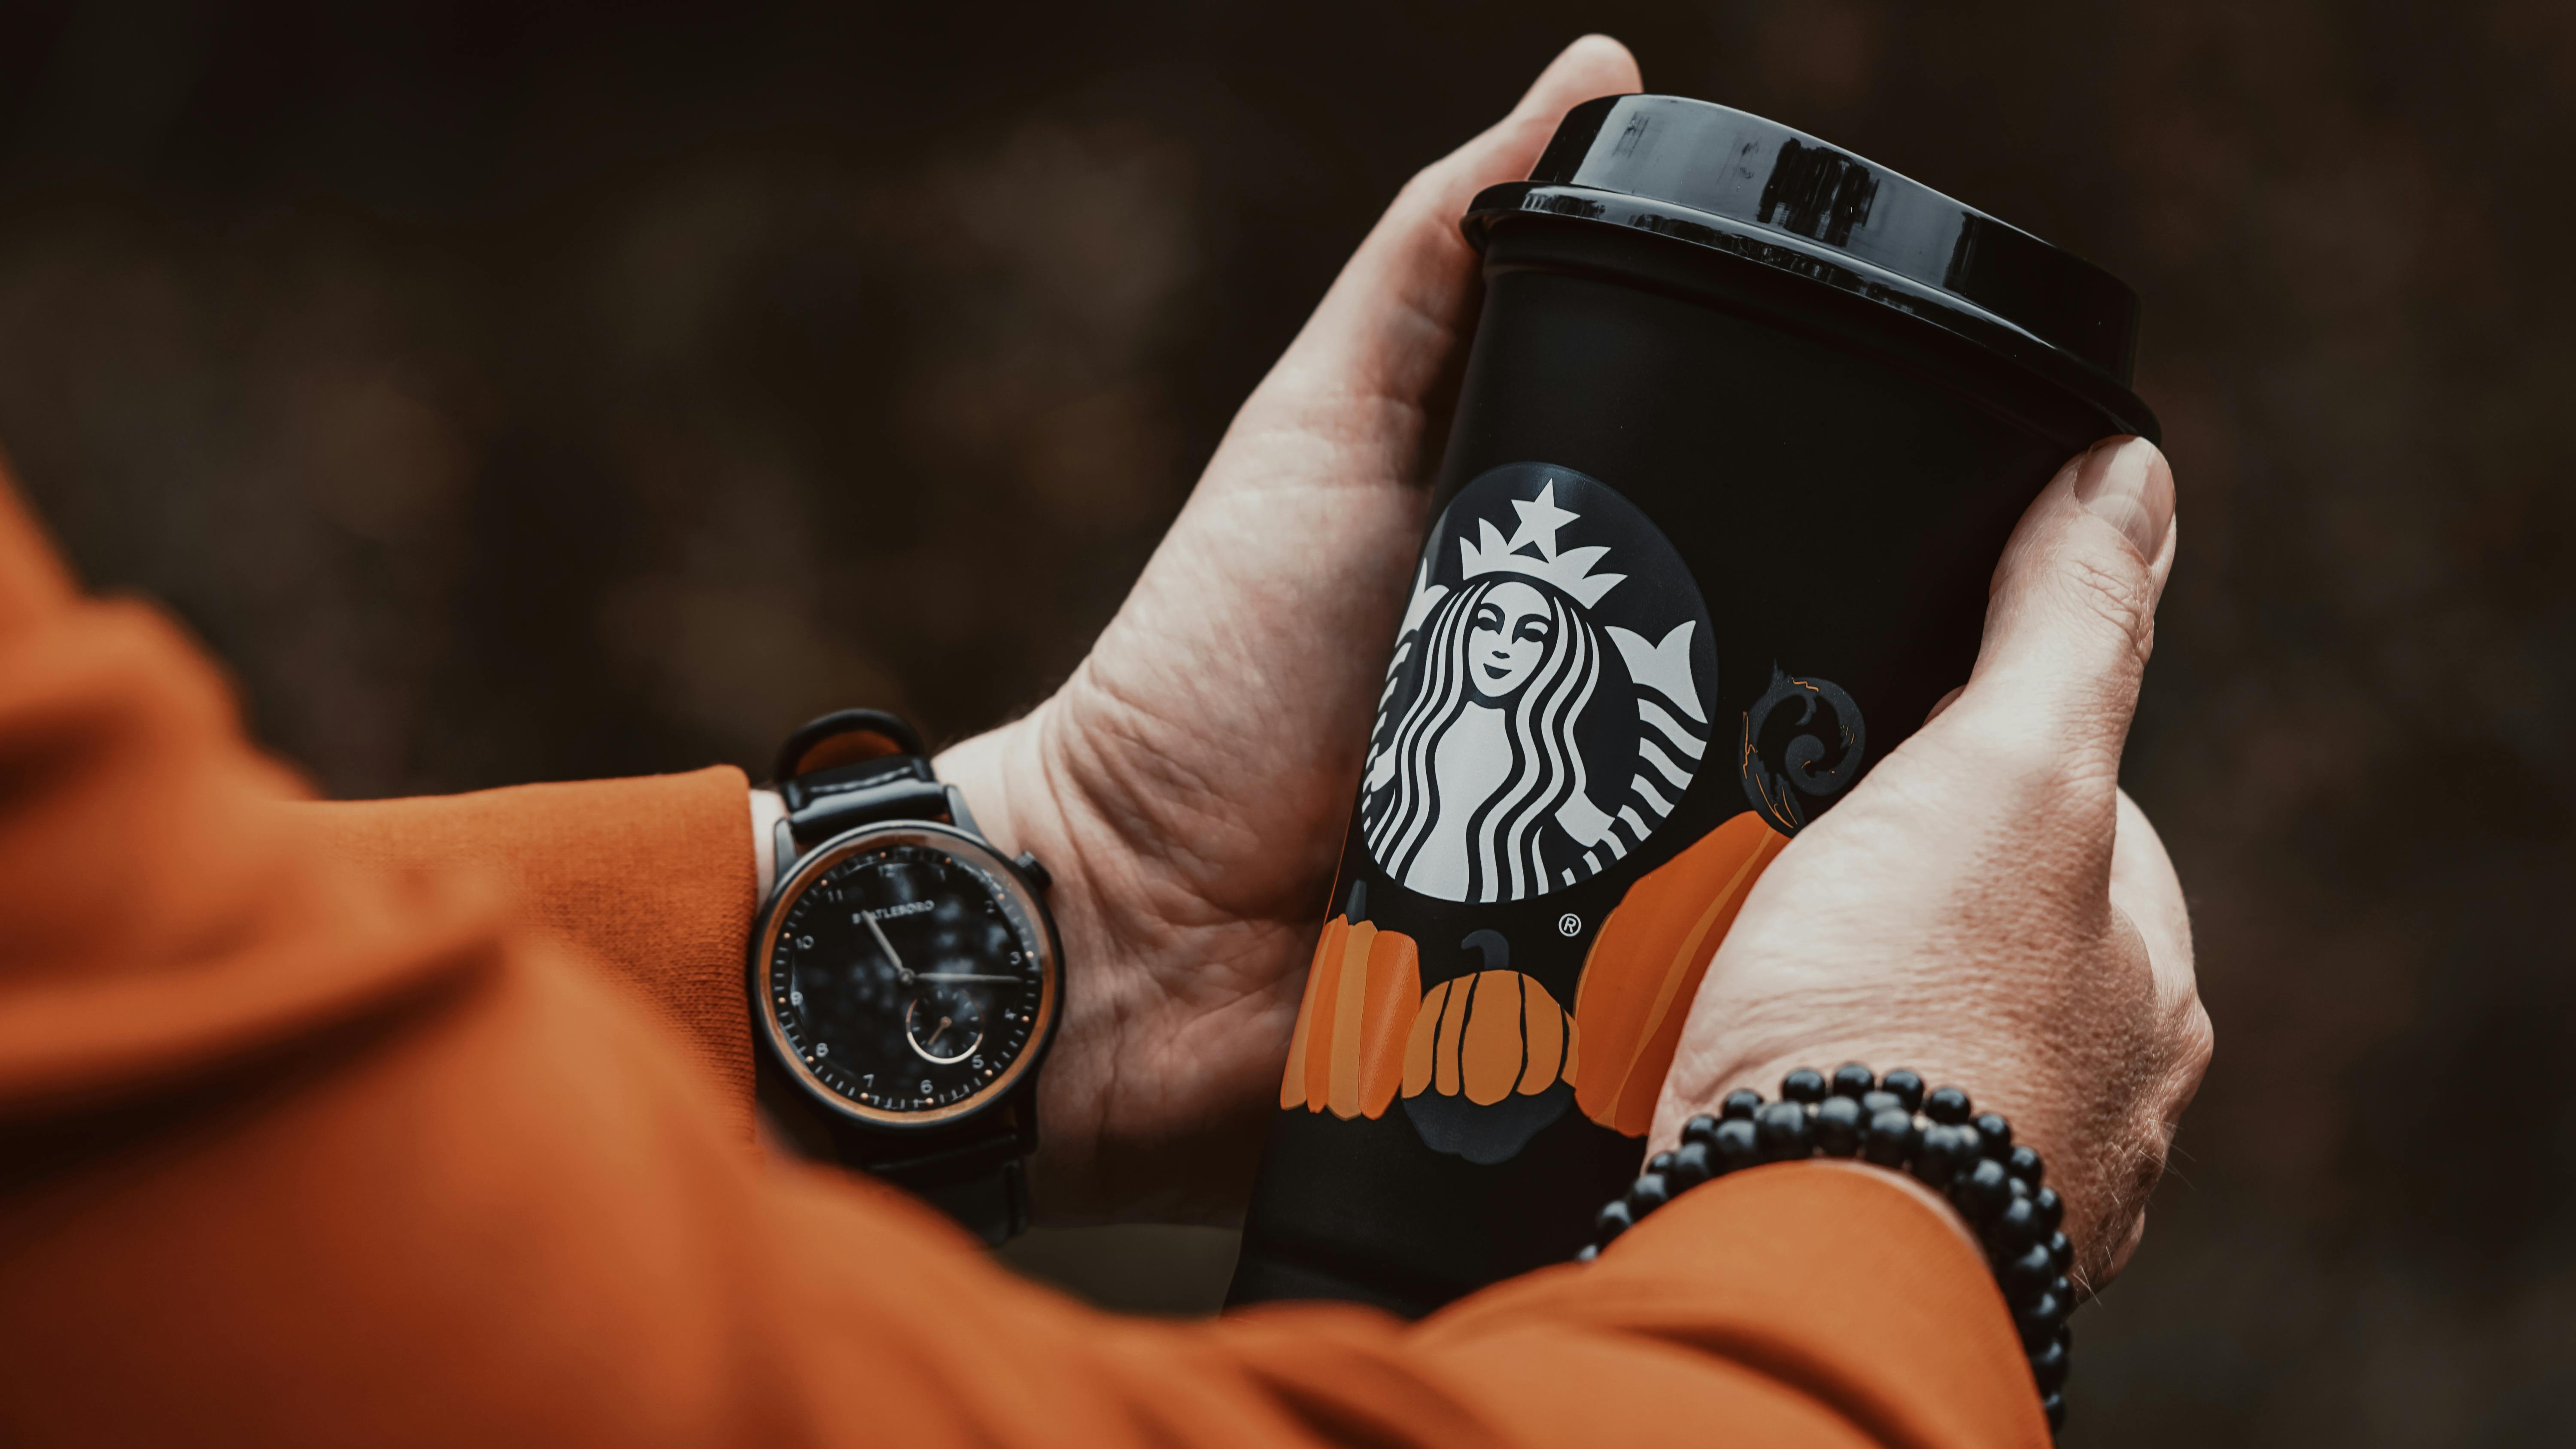 Woman Holding a Starbucks Clear Plastic Cup · Free Stock Photo